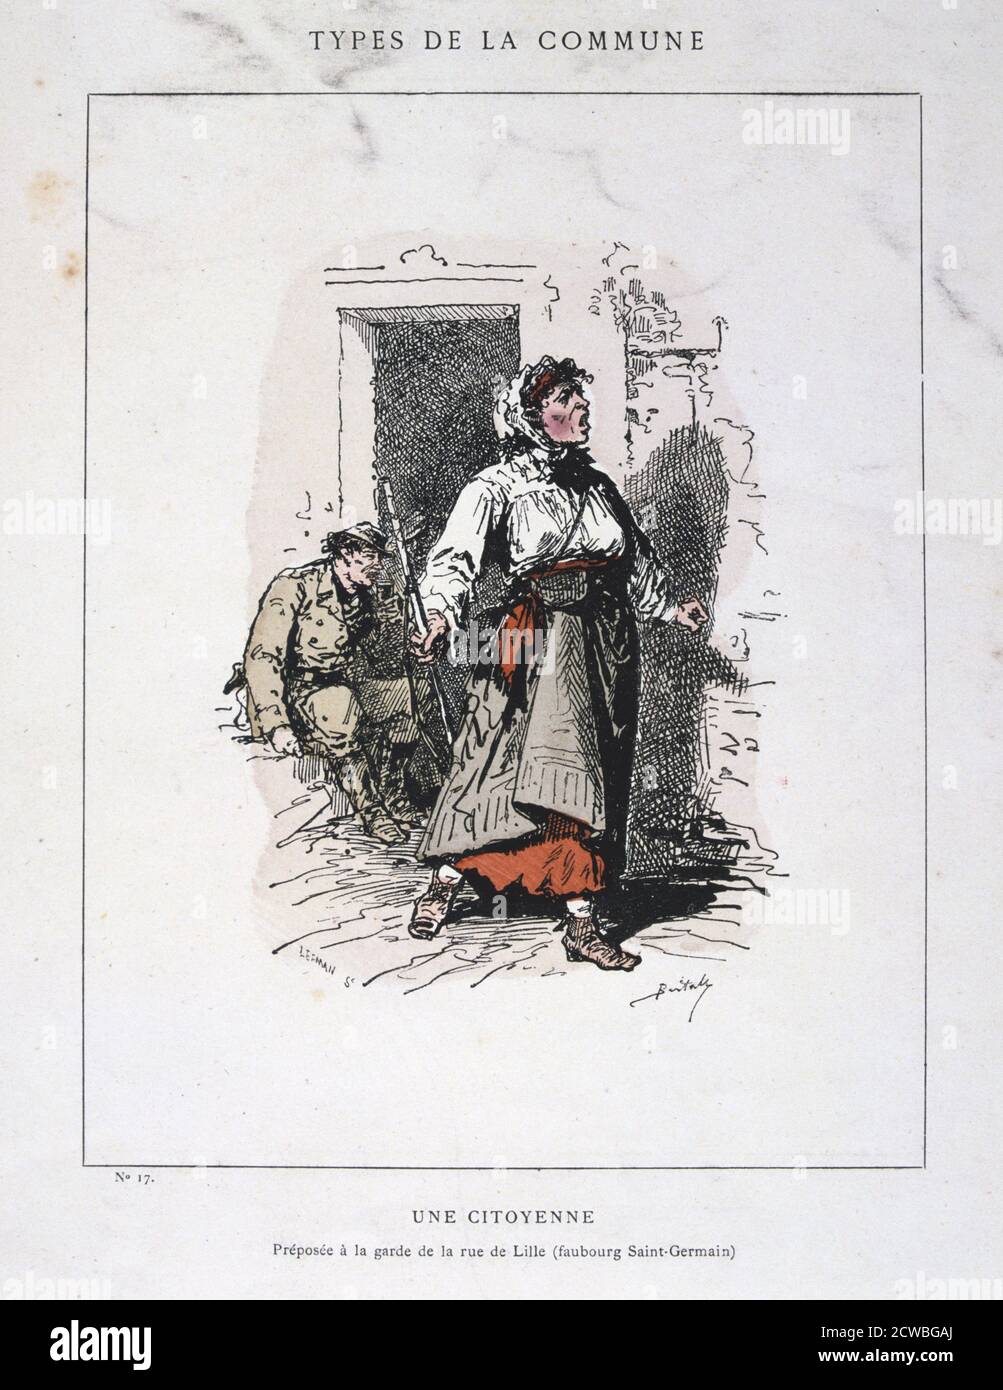 Une Citoyenne', Paris Commune, 1871. Cartoon from a series titled Types de la Commune. The Paris Commune was established when the citizens of Paris, many of them armed National Guards, rebelled against the policies of the conservative government formed after the end of the Franco-Prussian War. The left-wing regime of the Commune held sway in Paris for two months until government troops retook the city in bloody fighting in May 1871. The events of the Commune were an inspiration to Karl Marx as well as later communist leaders including Lenin, Trotsky and Mao. From a private collection. Stock Photo